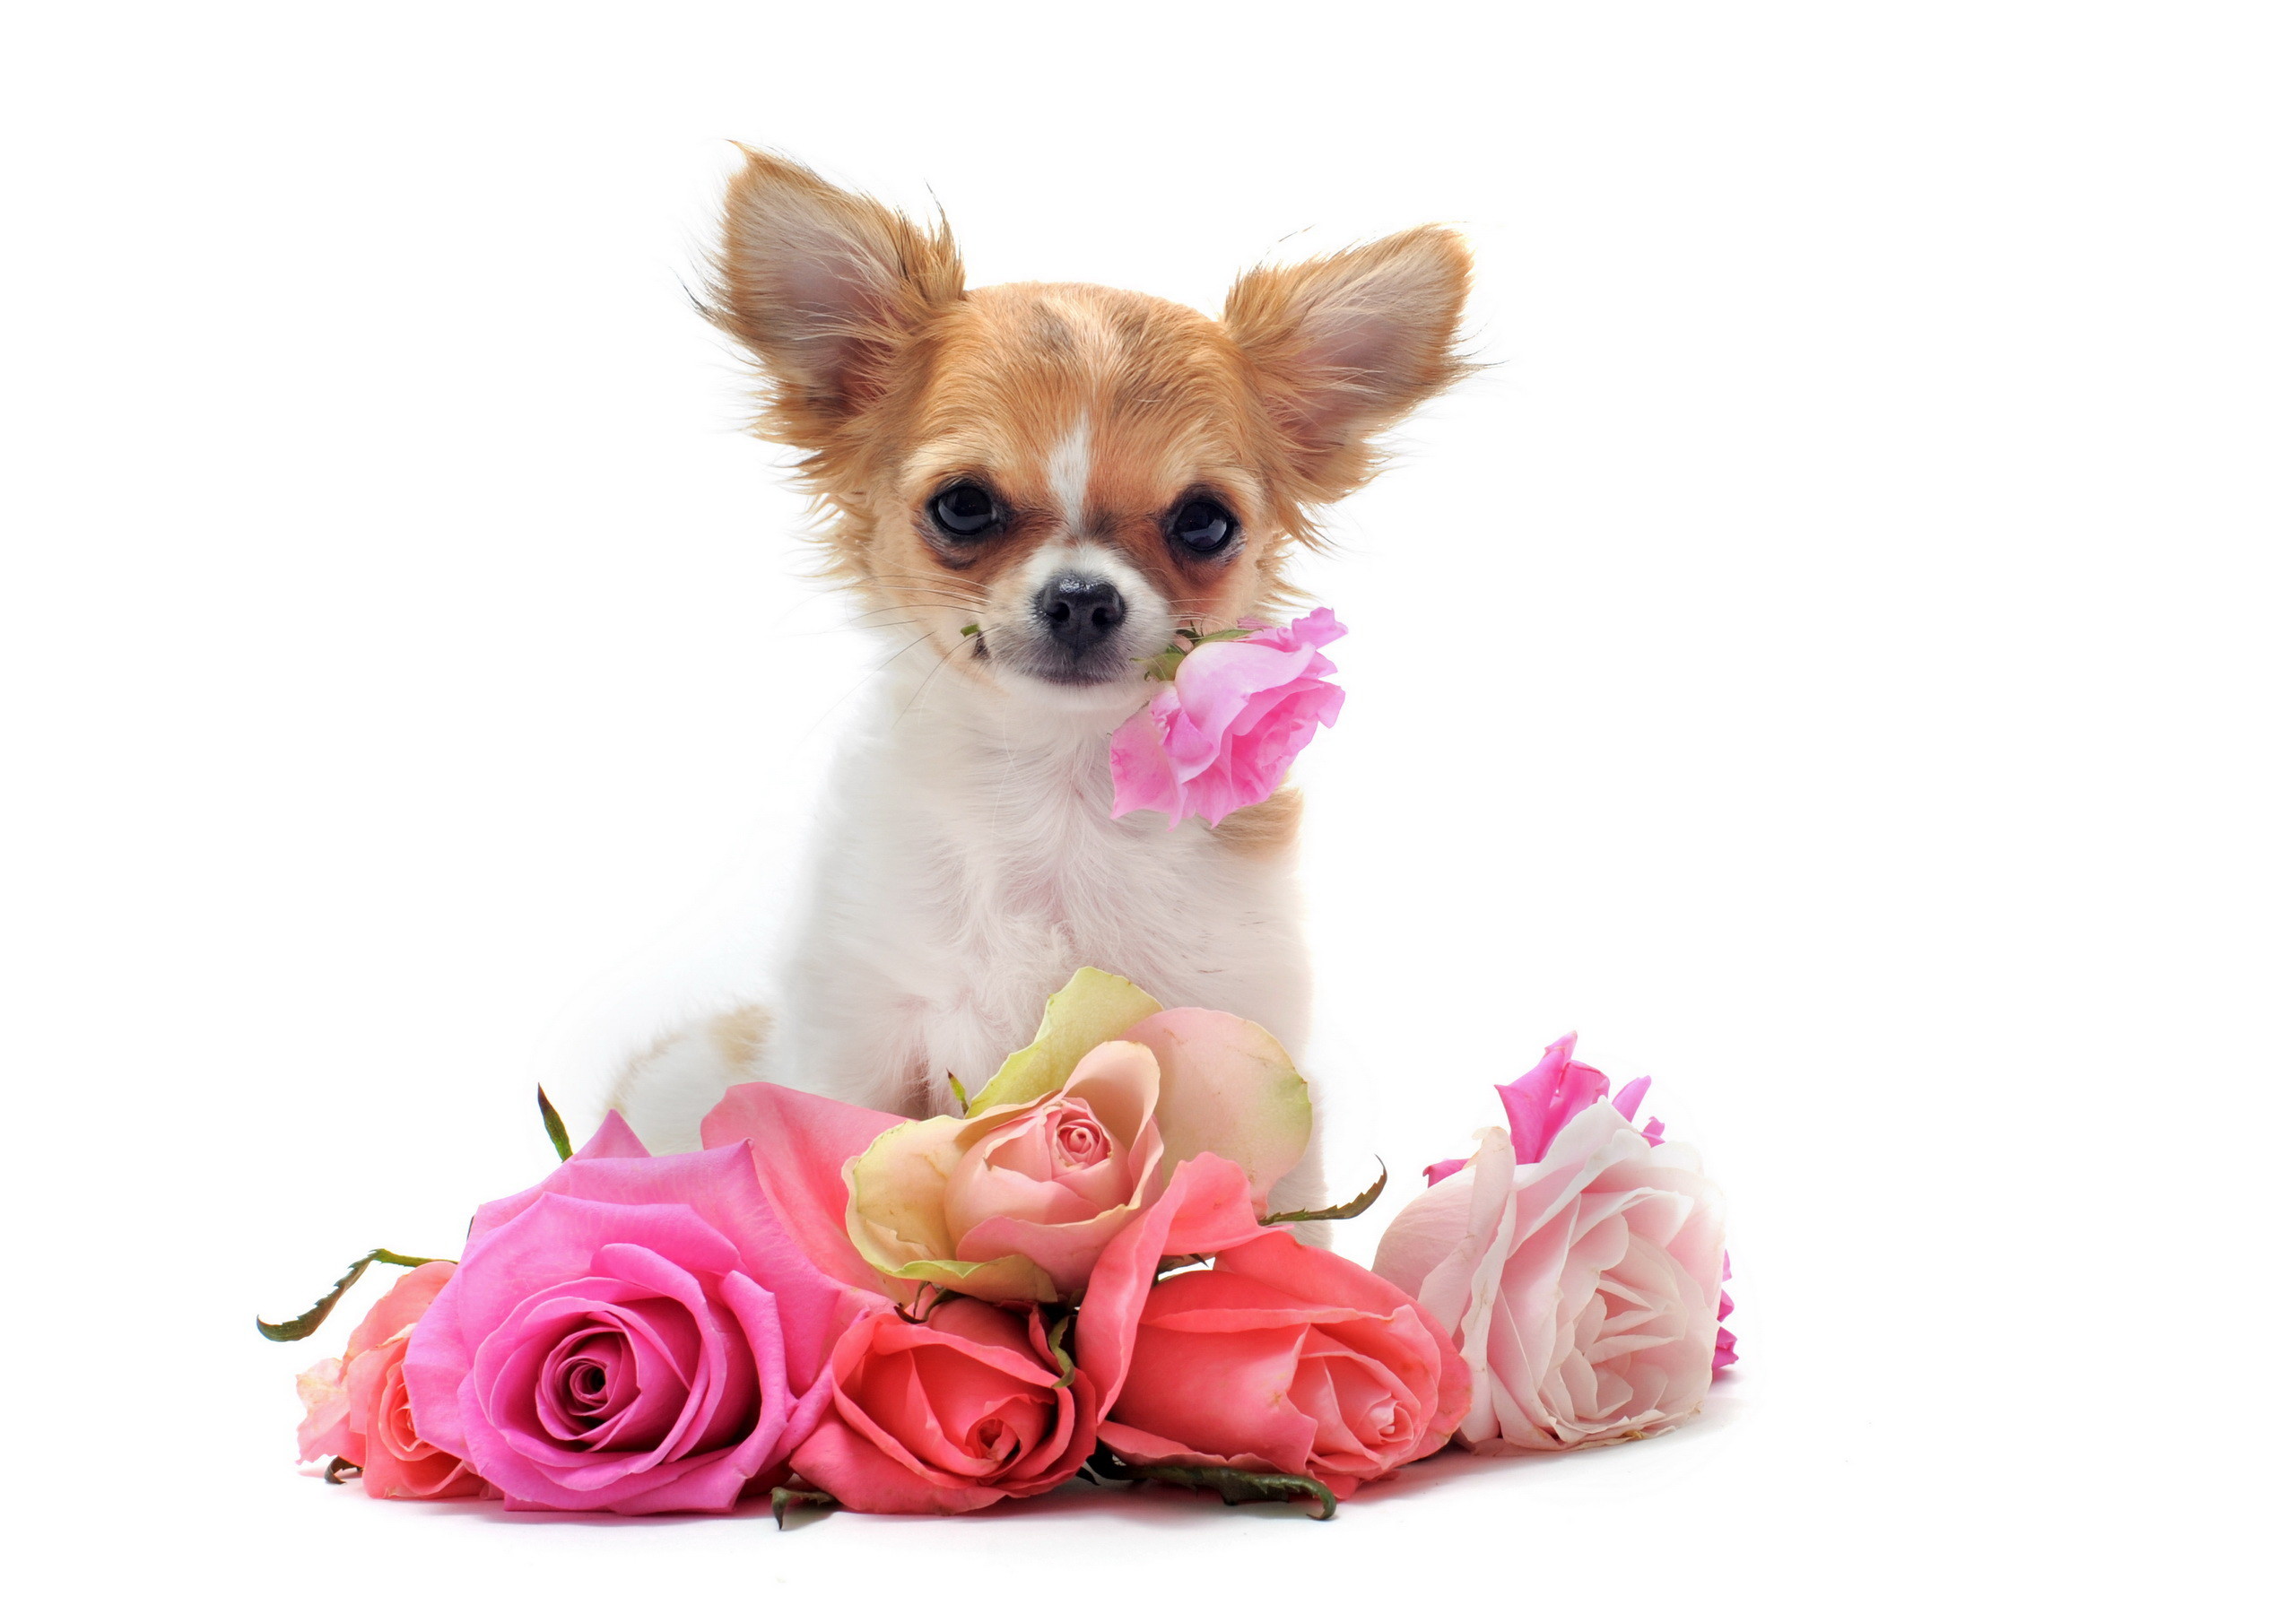 2560x1790 PlusPng.com Elegant Chihuahua Widescreen Background Wallpapers Gallery,  CAX-1308683 PlusPng.